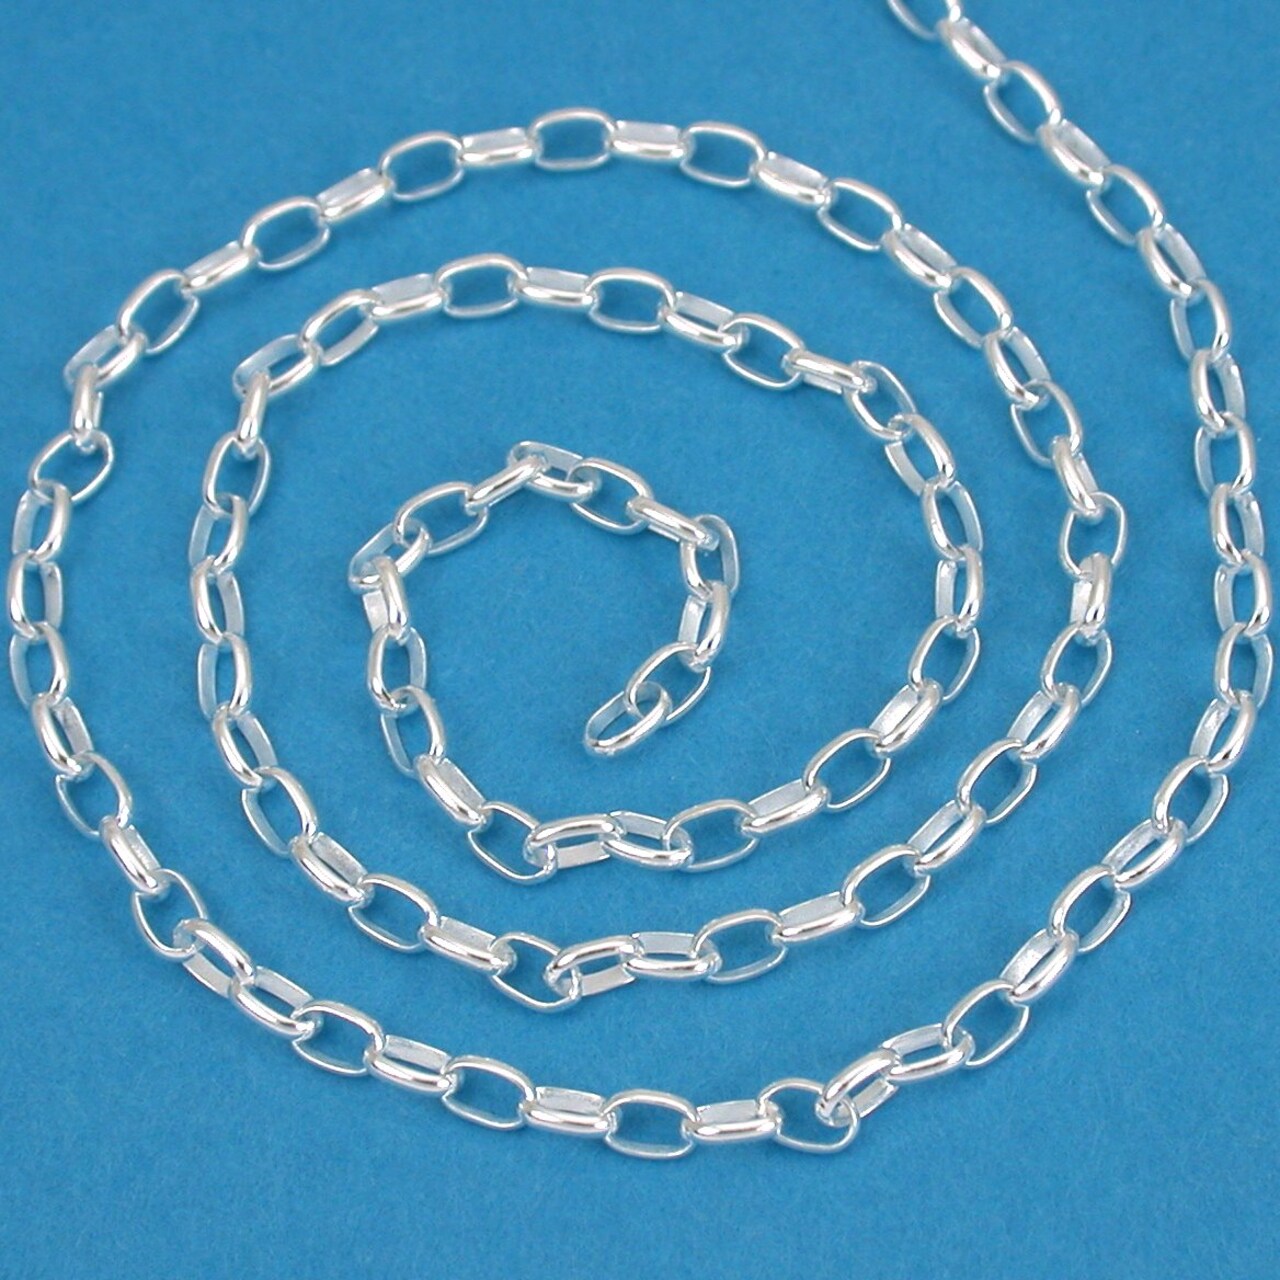 St. Silver Oval Rolo Wide Chain Bulk By The Foot 2.5mm